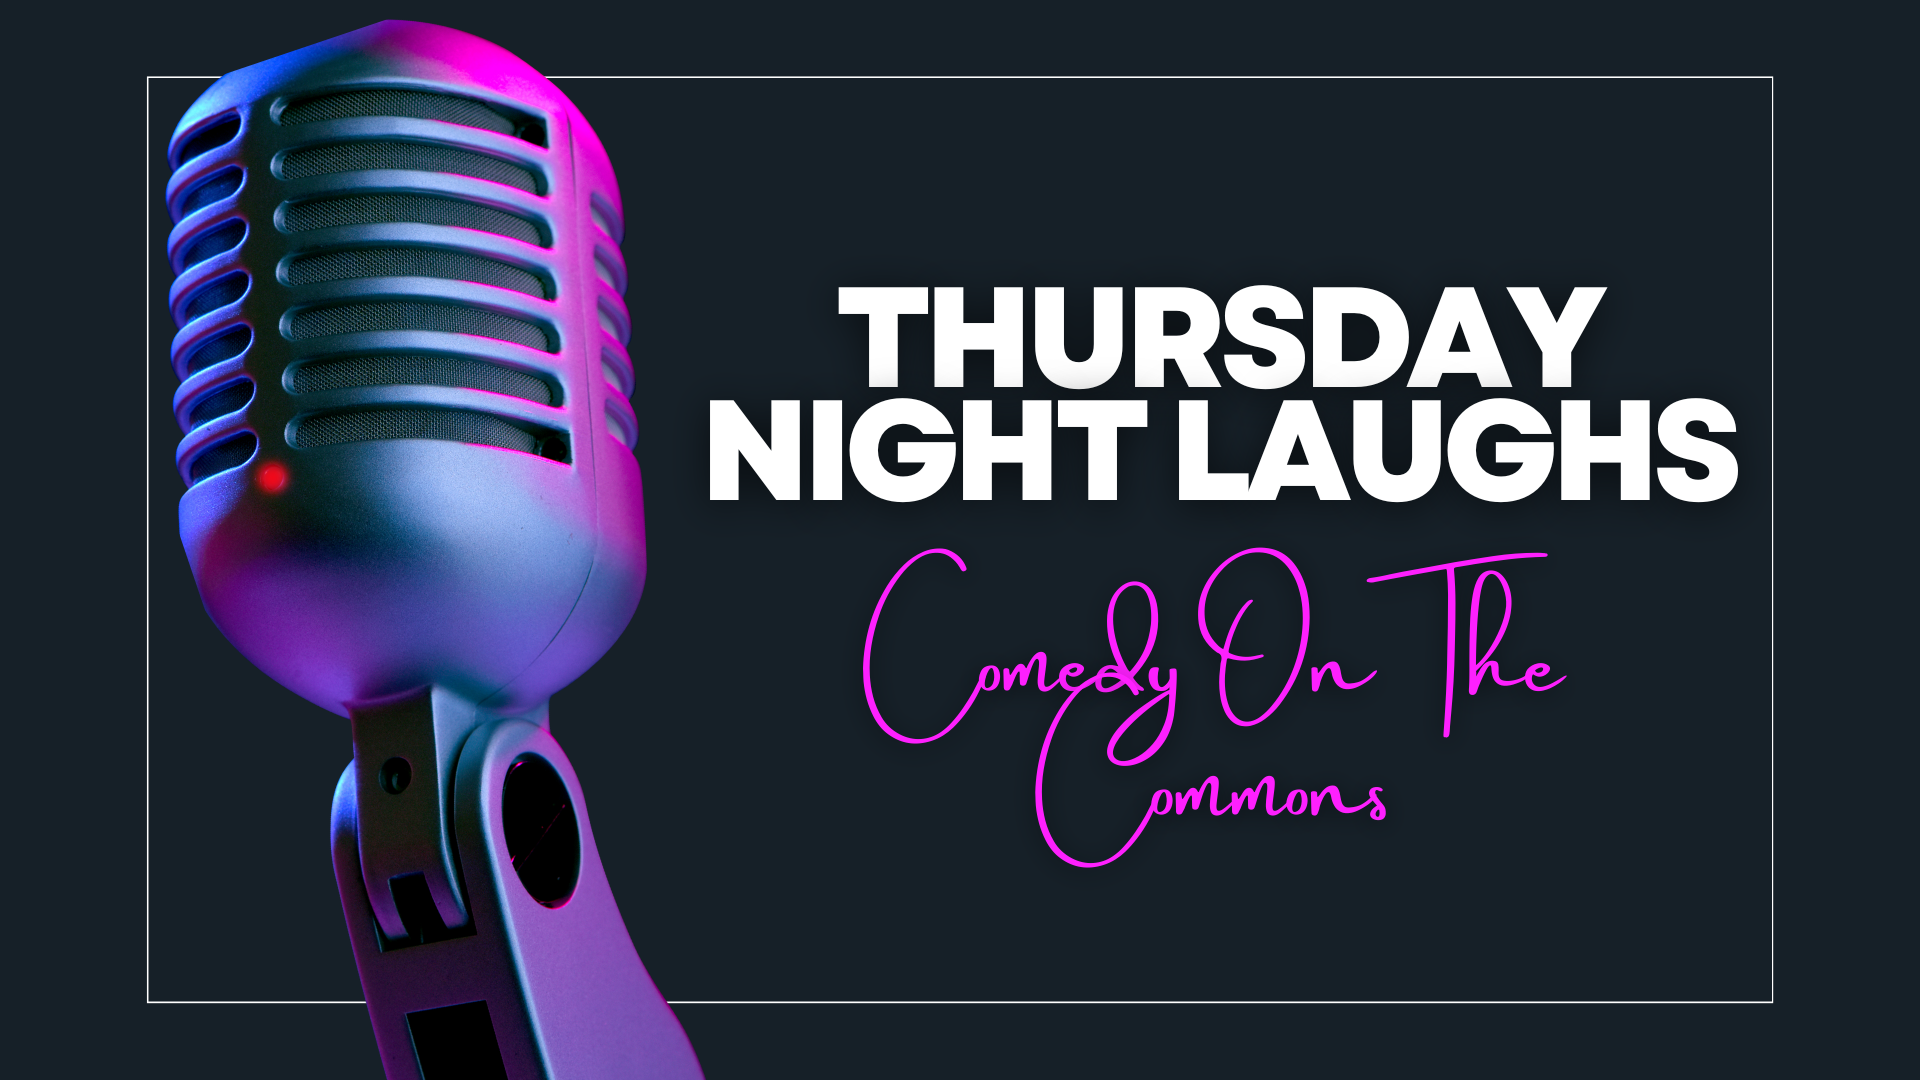 Thursday Night Laughs with Comedy on the Commons 